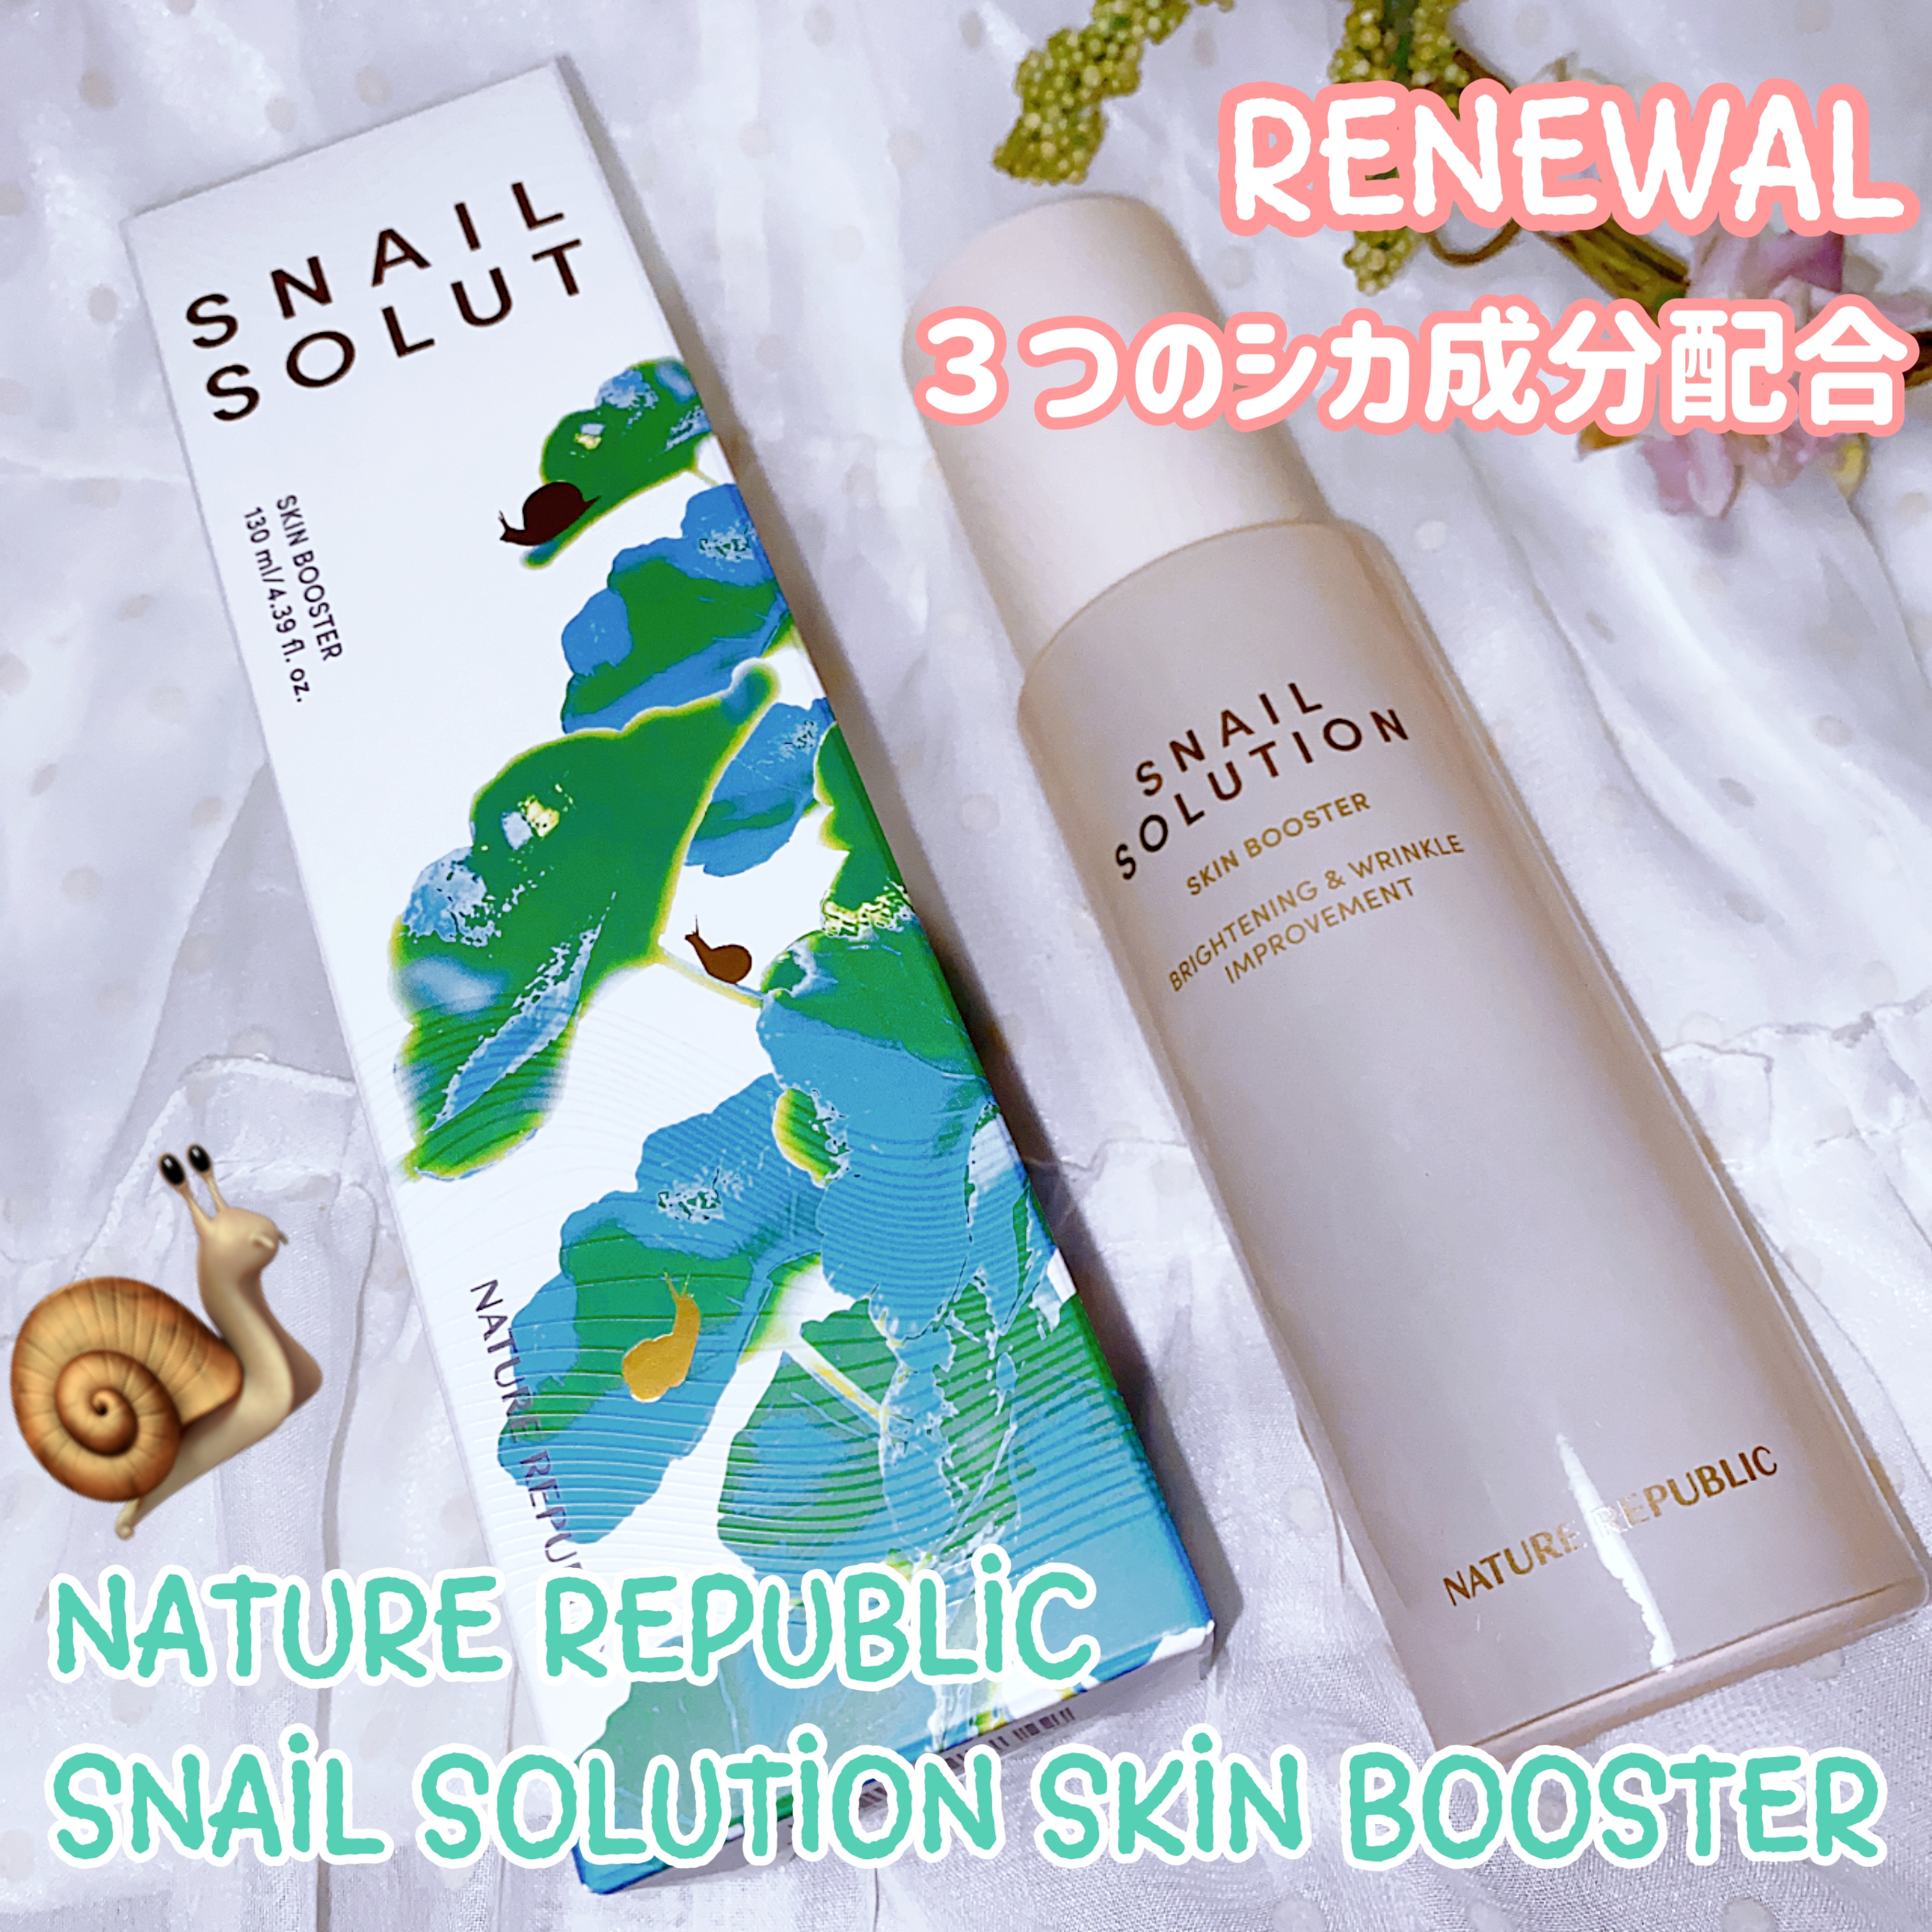 NATURE REPUBLIC SNAIL SOLUTION SKIN BOOSTERを使った珈琲豆♡さんのクチコミ画像1